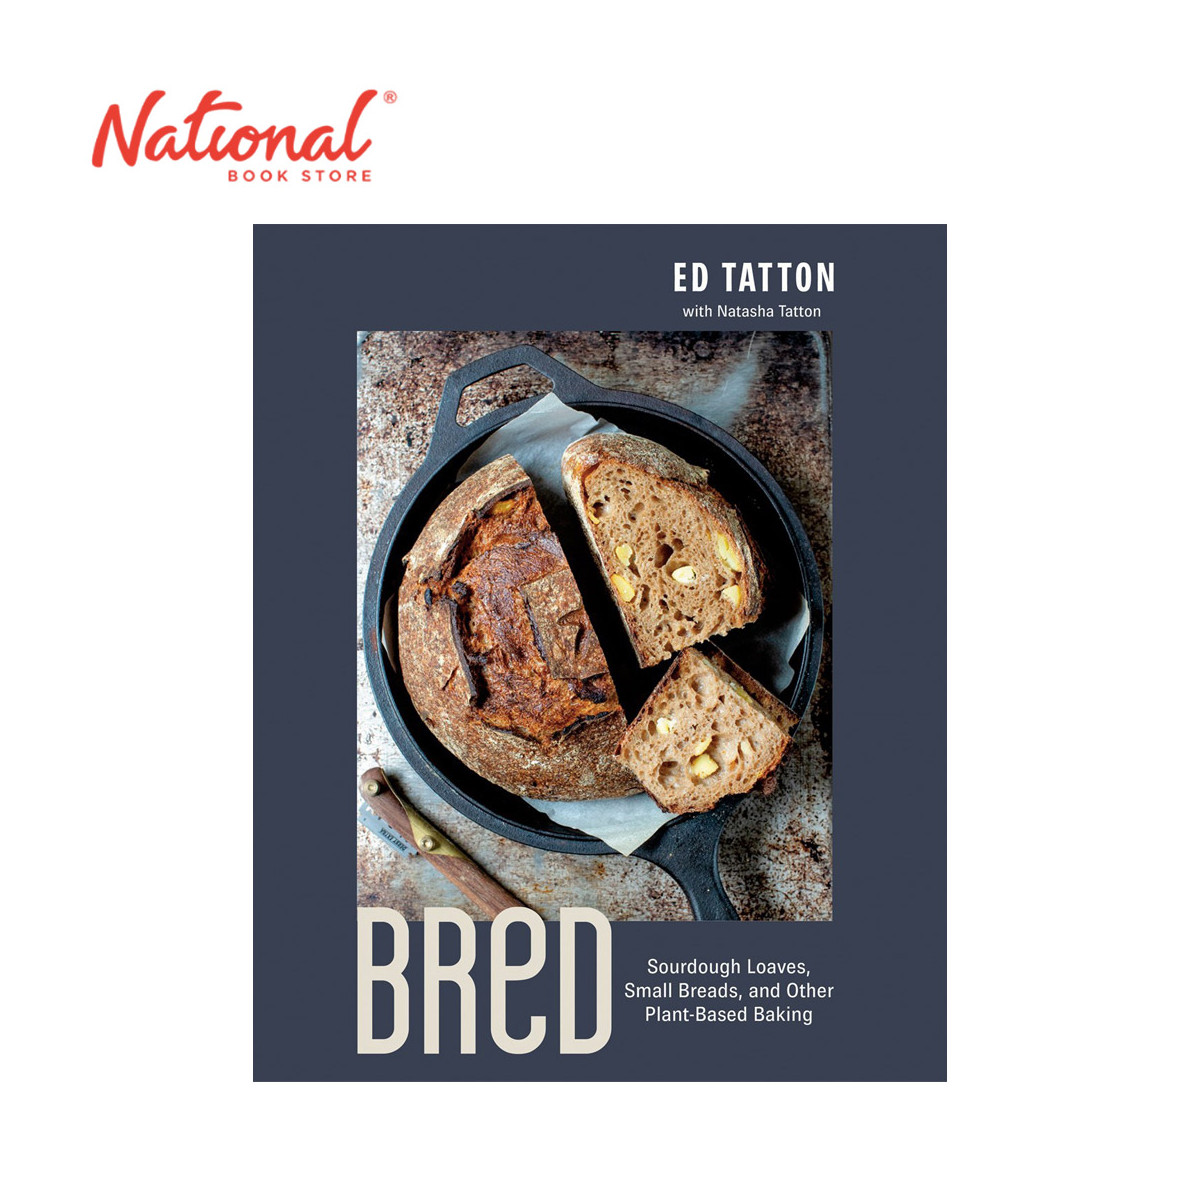 Bred : Sourdough Loaves, Small Breads, and Other Plant-Based Baking by Ed Tatton - Hardcover